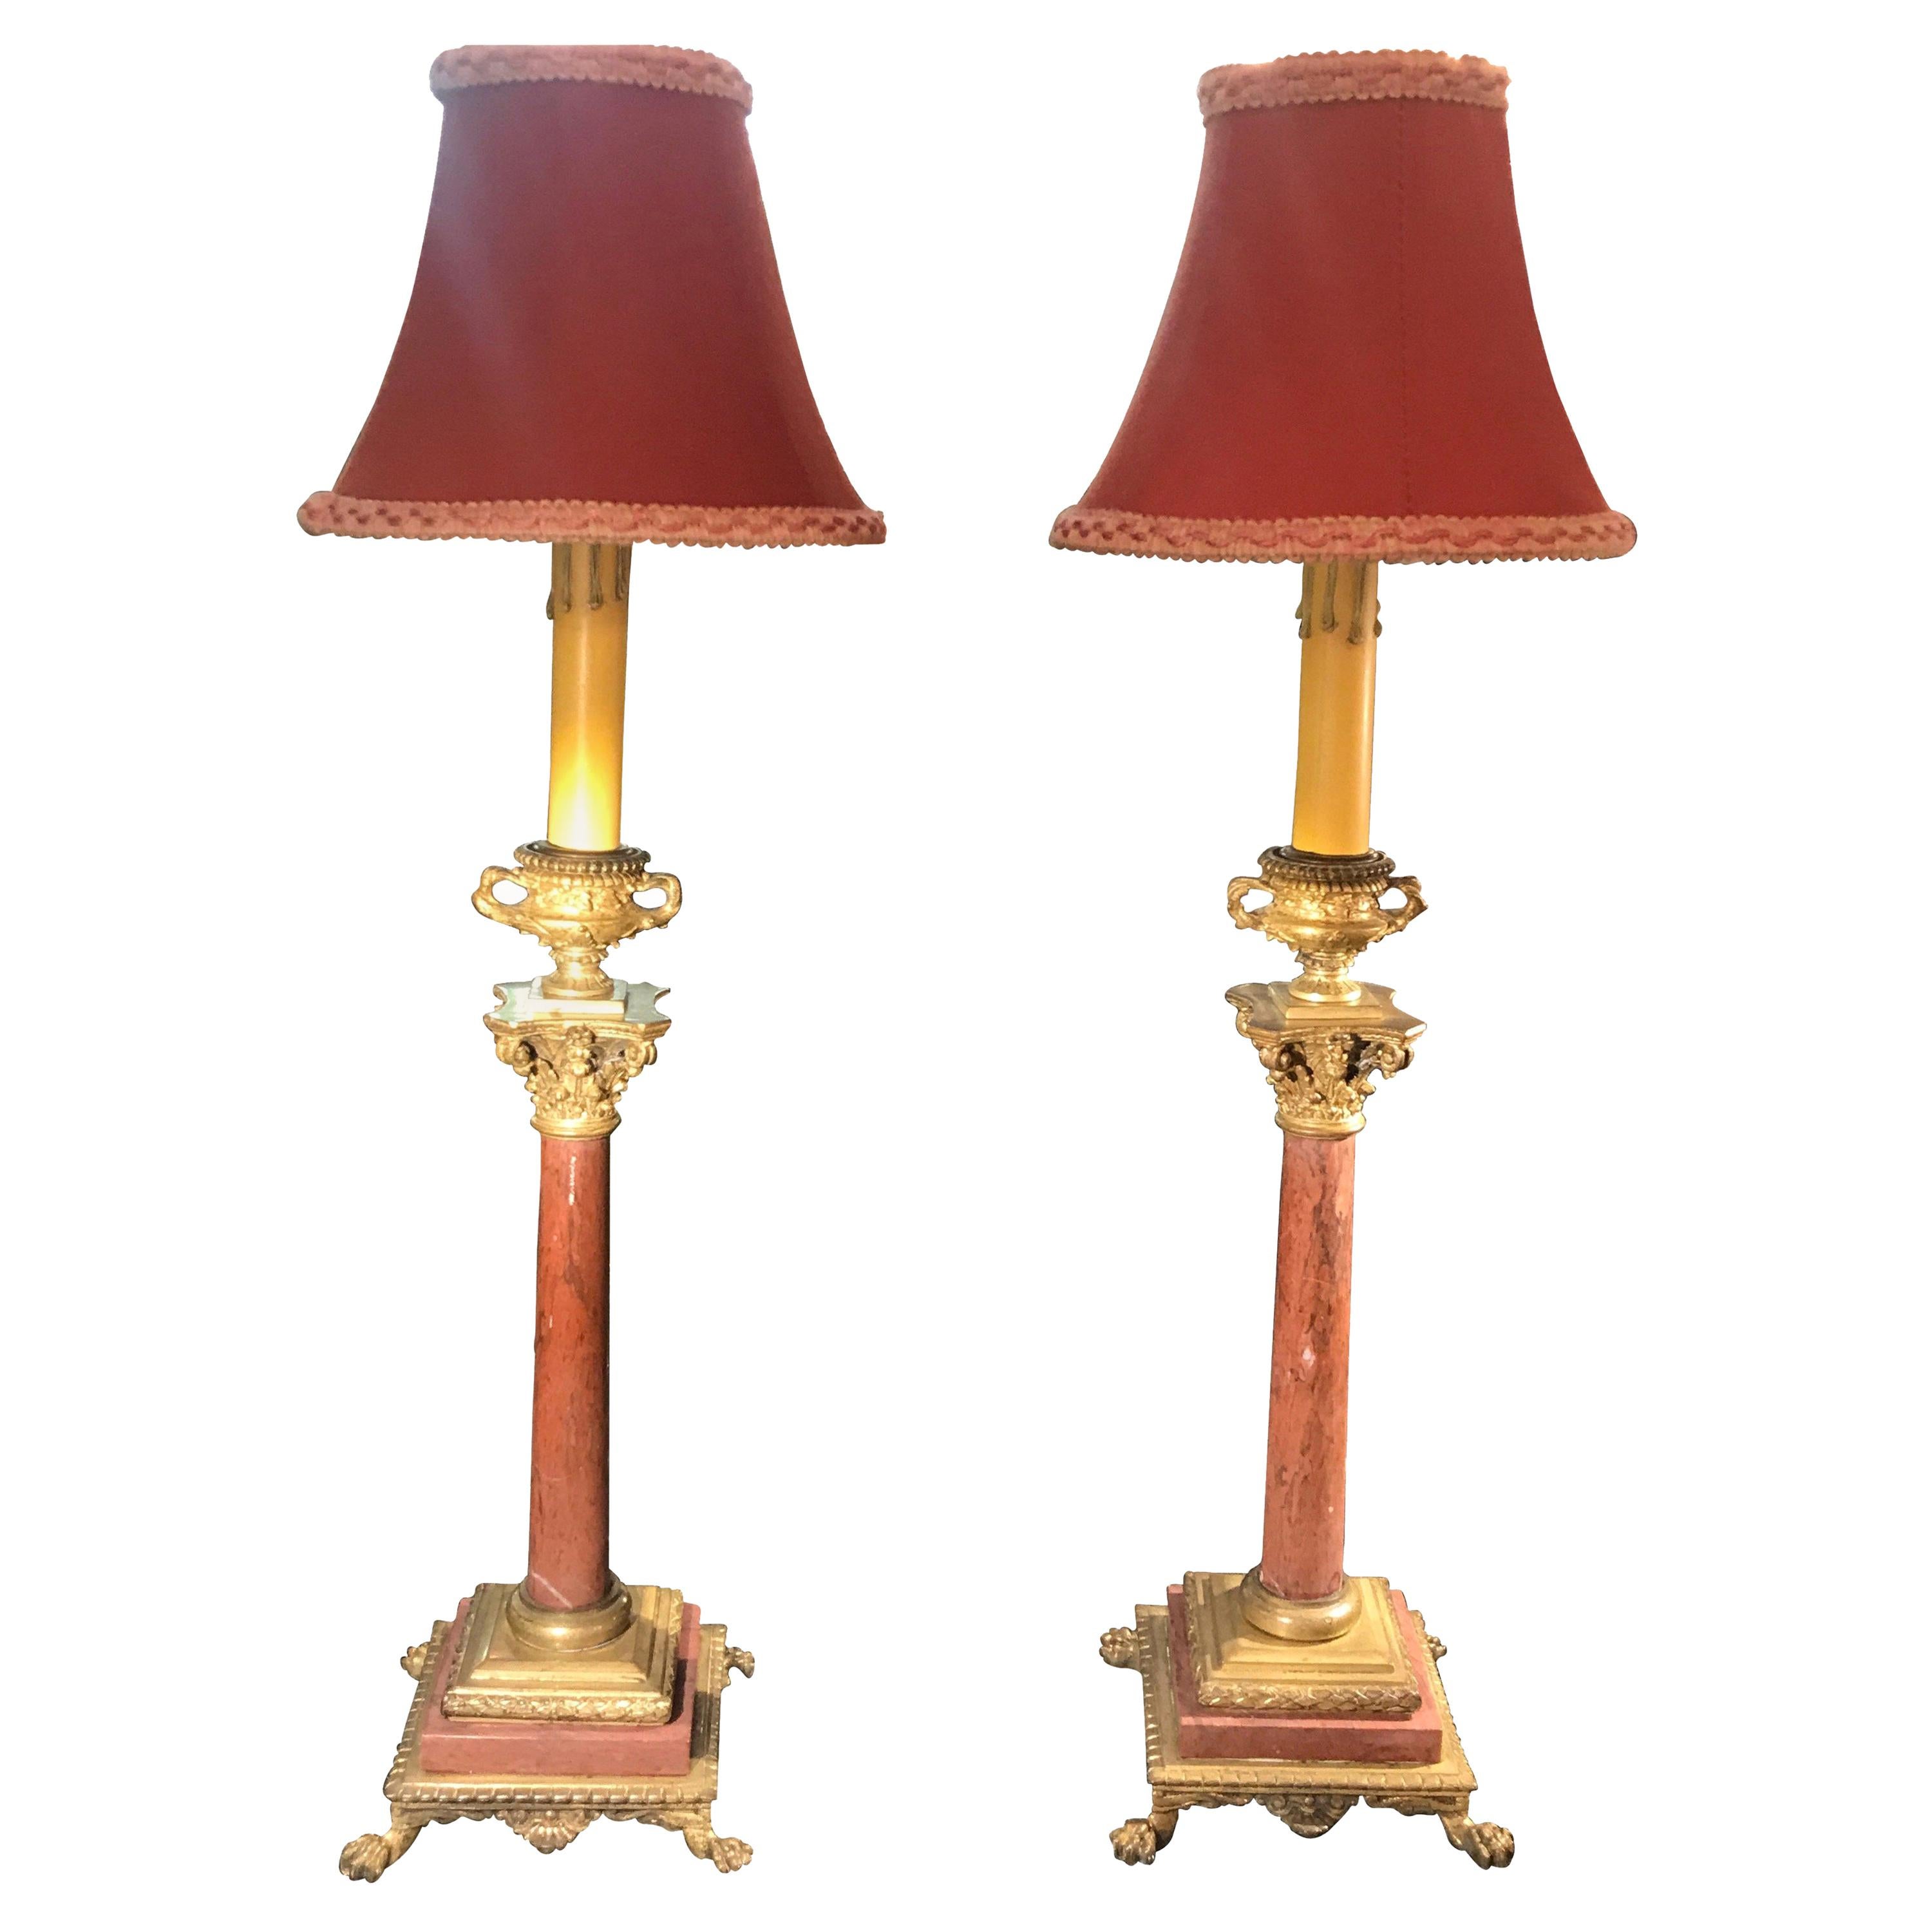 Antique Pair of Grand Tour Rouge Marble and Bronze Candlestick Lamps